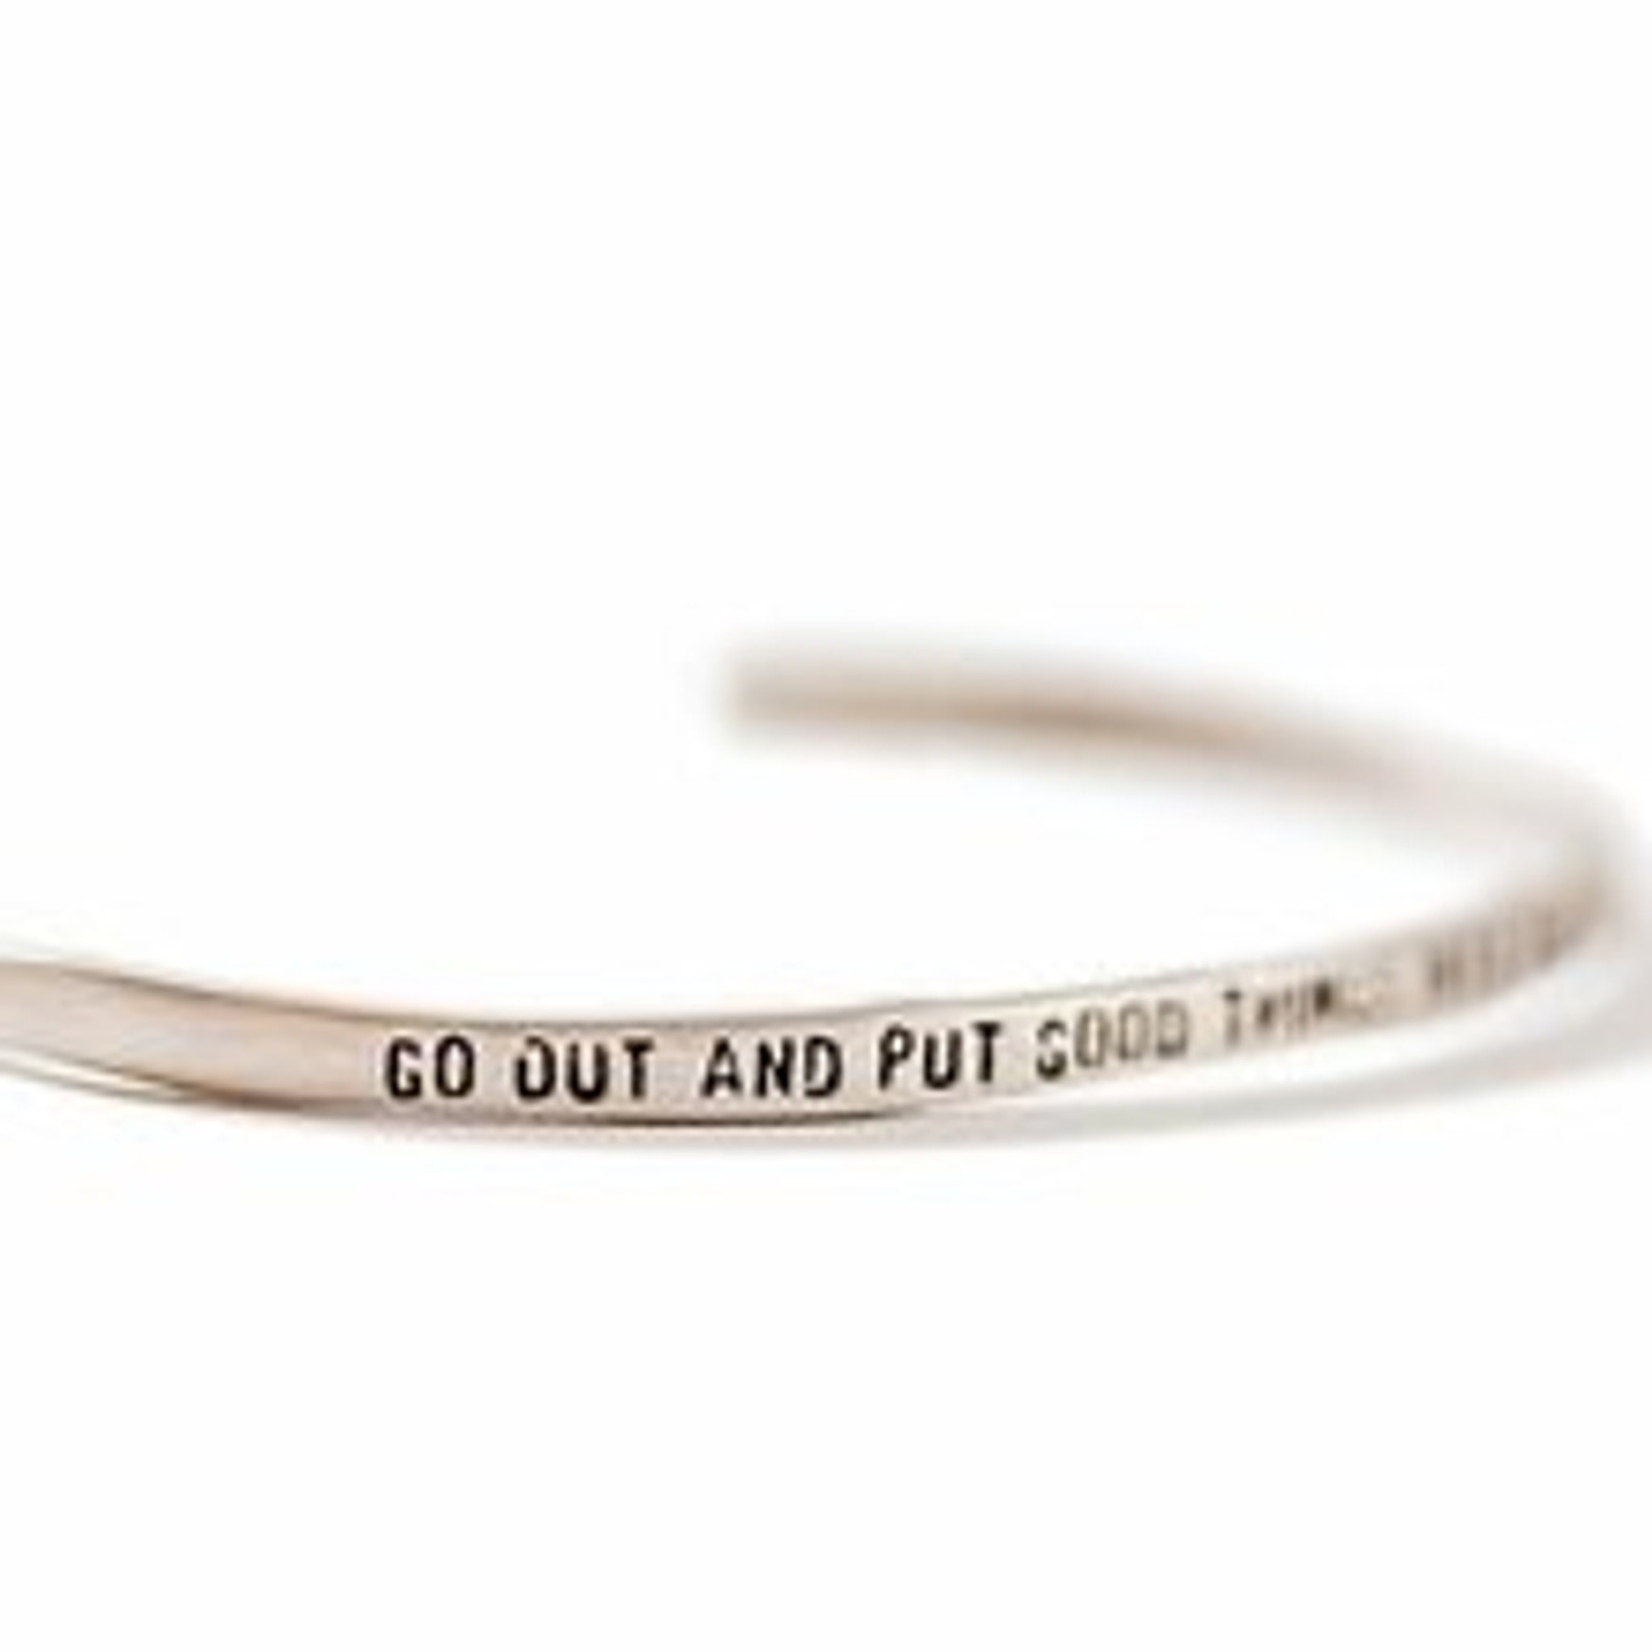 Sugarboo & Co. Sterling Silver - Go Out and Put Good Things Cuff Bracelet